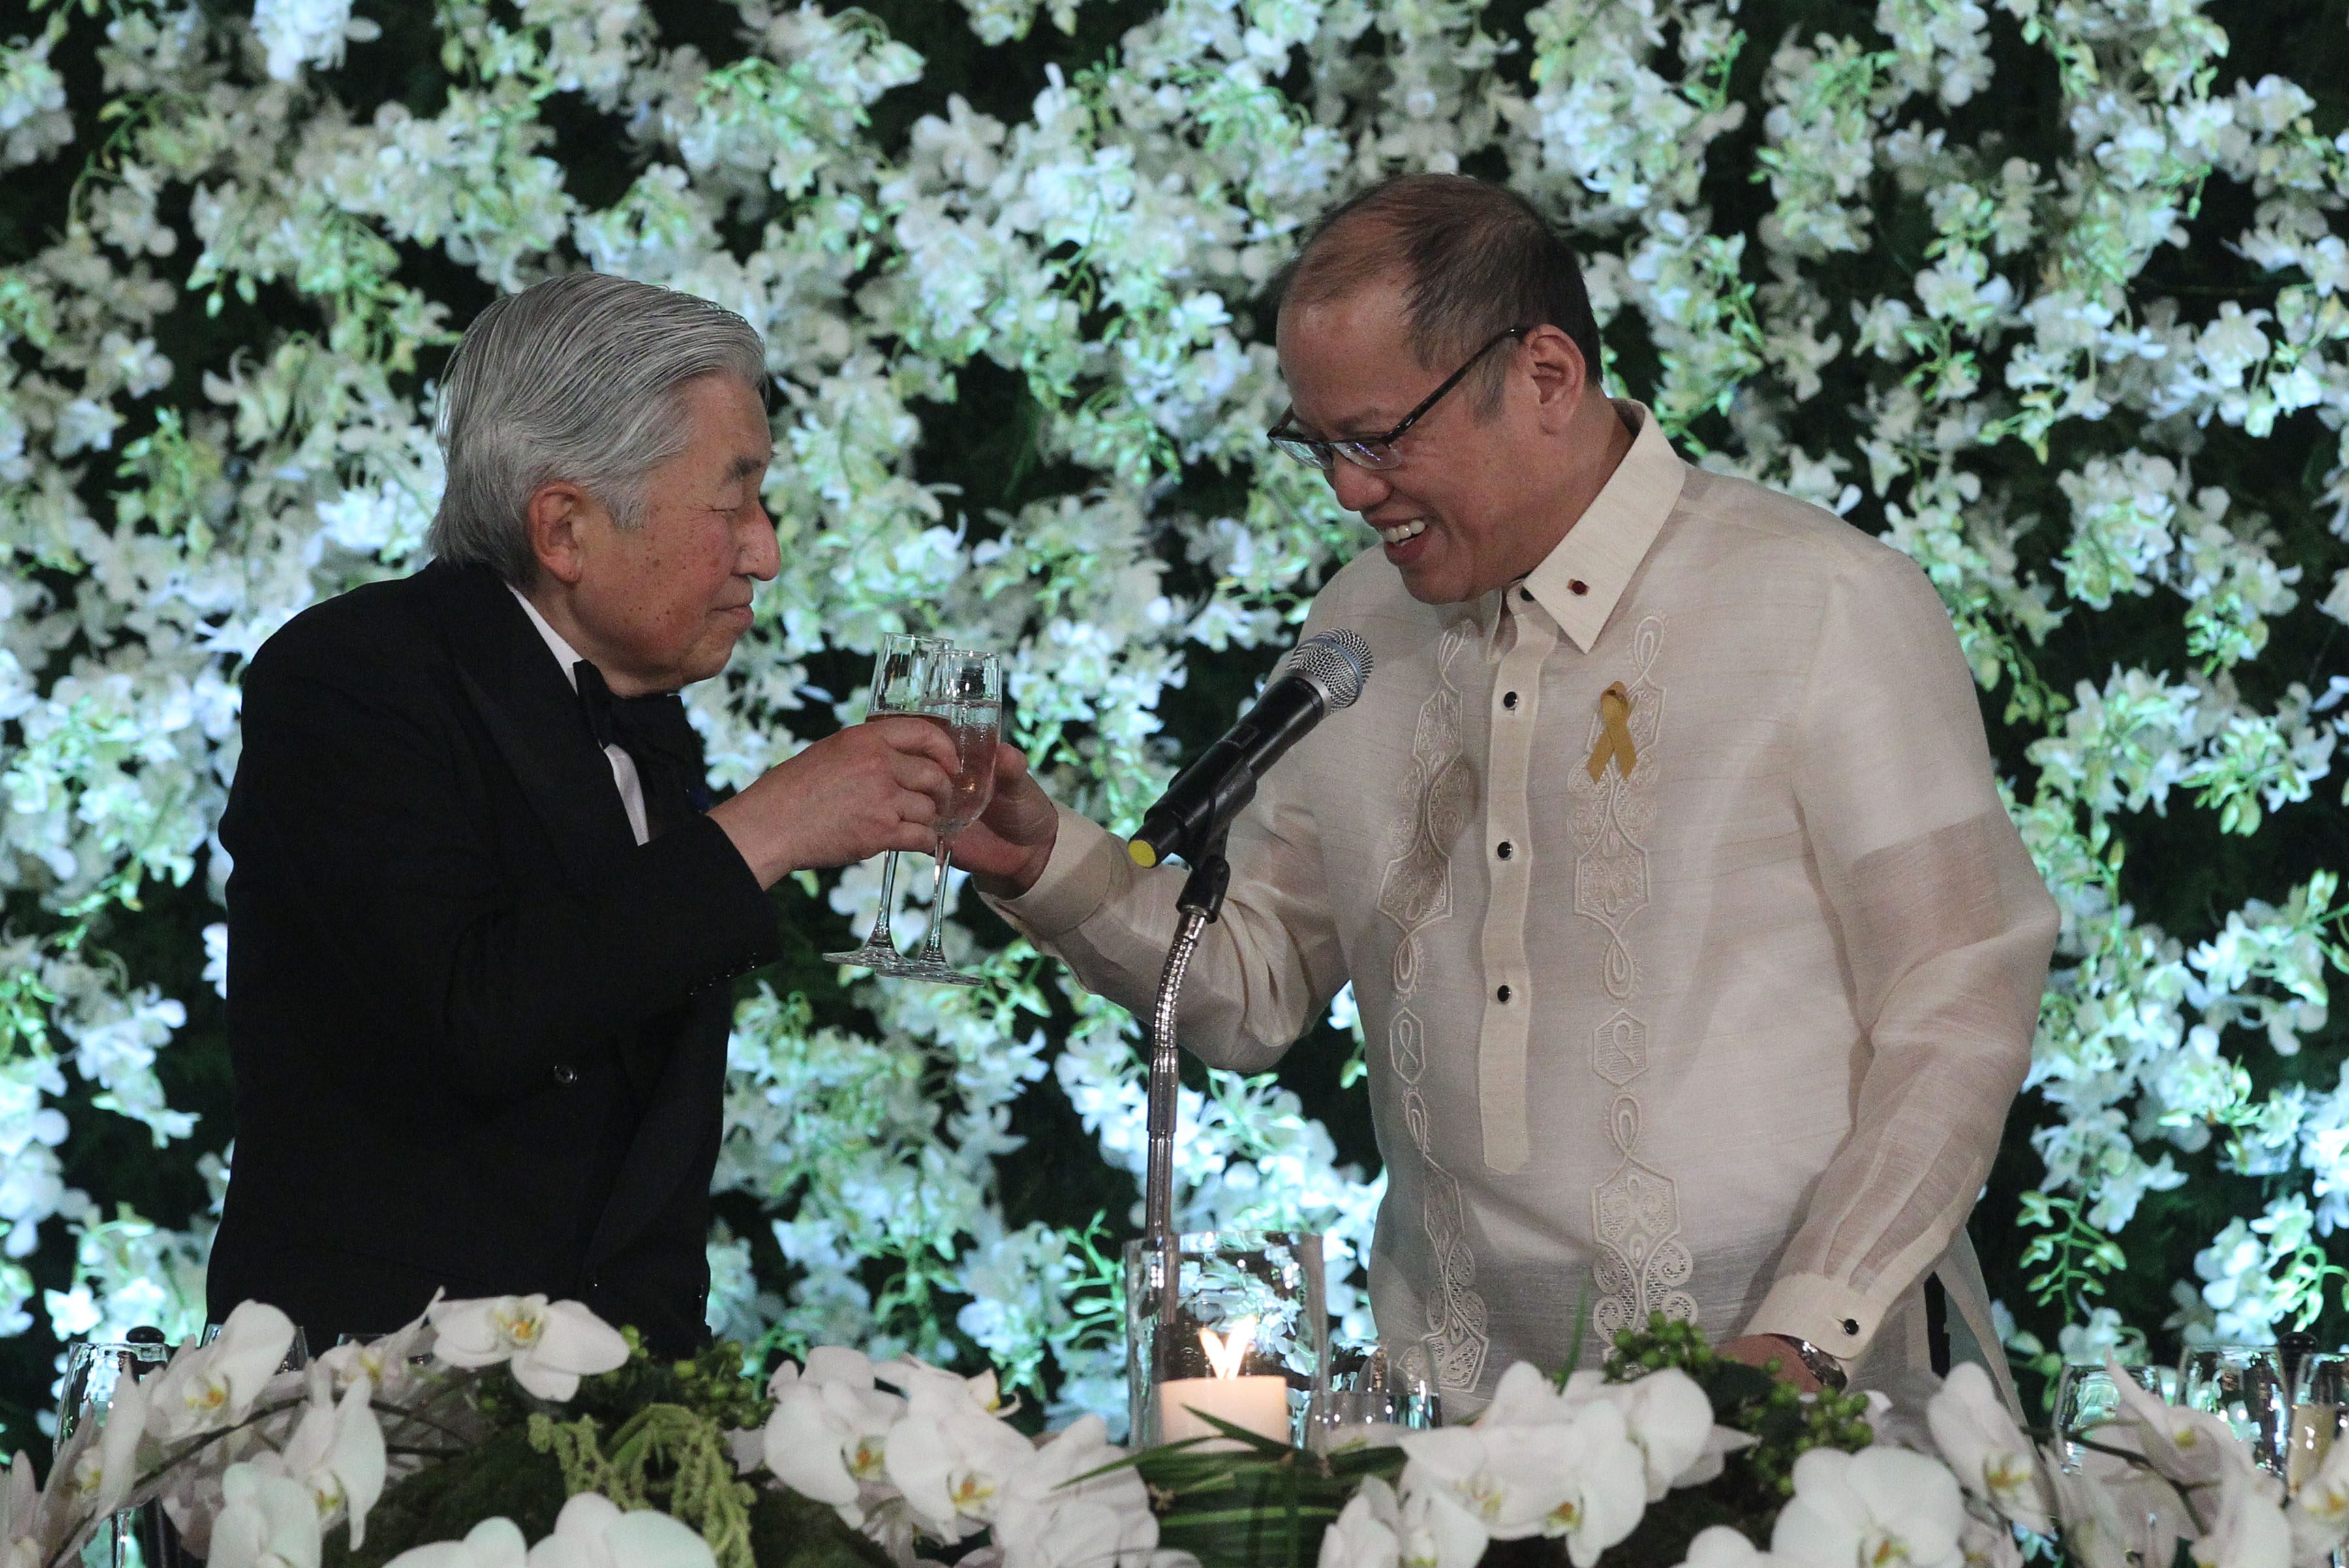 PARTNERS. President Benigno Aquino III and His Majesty Emperor Akihito of
Japan do the ceremonial toast during the state dinner at the Rizal Hall of the Malacañan Palace on January
27, 2016. Aquino thanks Japan for being a reliable partner of the Philippines on various fronts. Photo by Robert Viñas/Malacañang Photo Bureau  